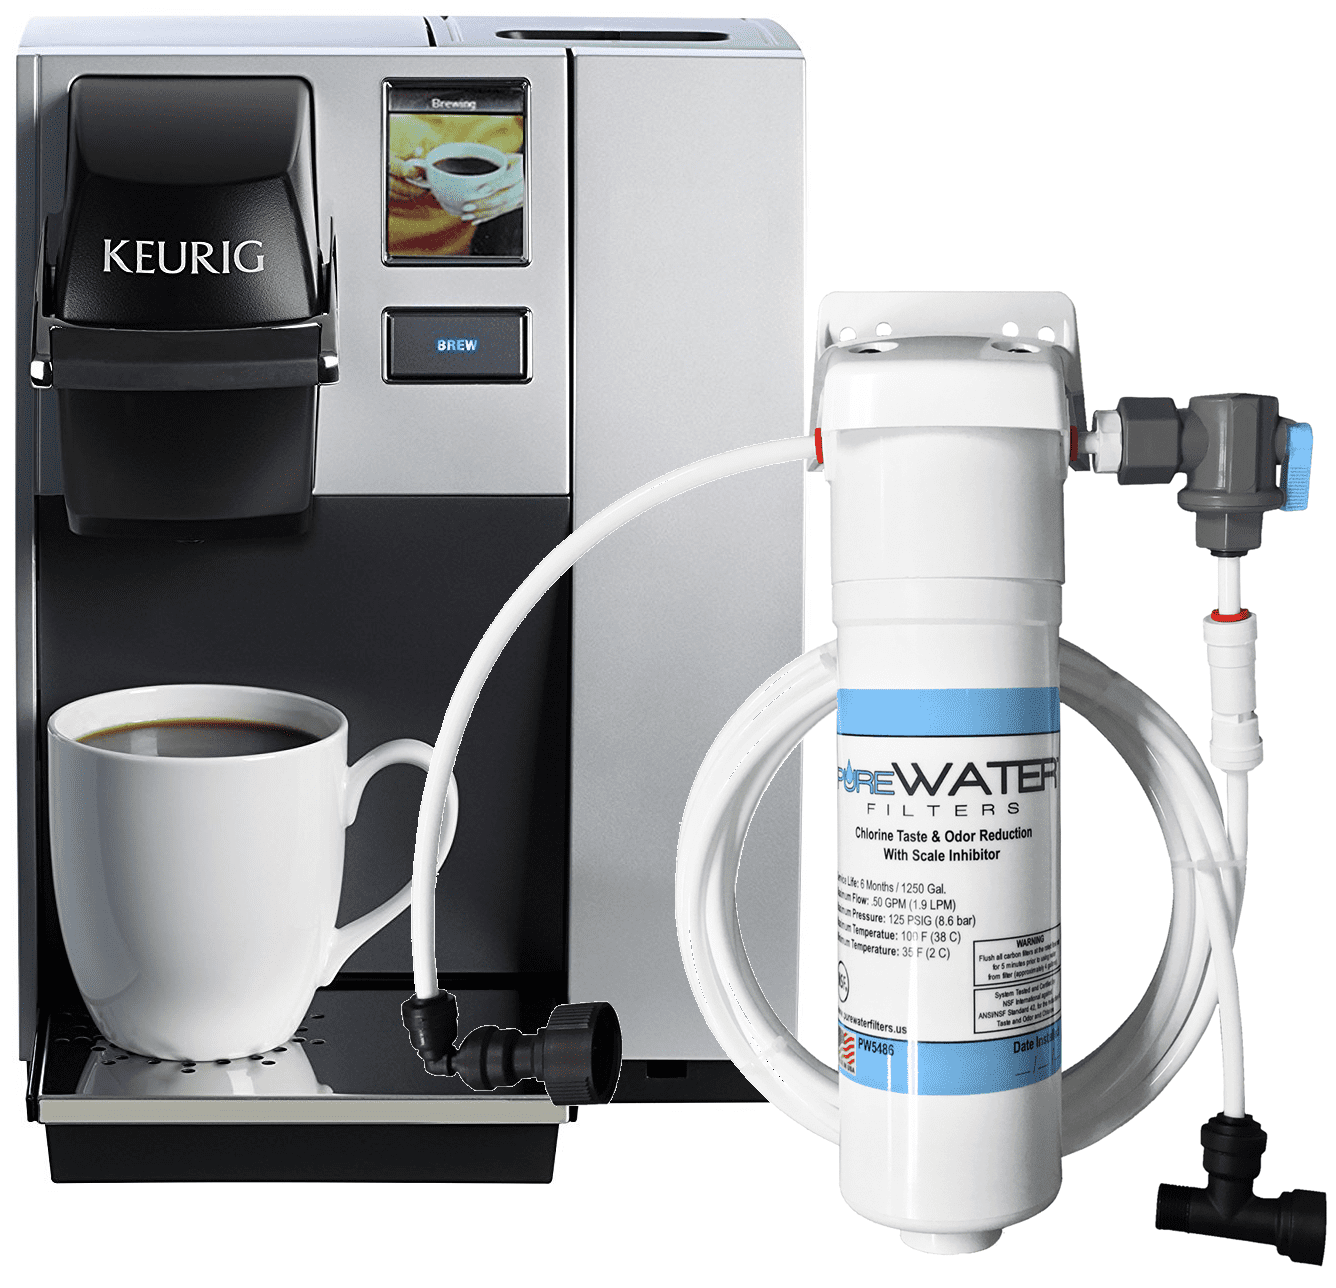 k150 with keurig plumb kit and super deluxe water filter kit 5572 kq8a